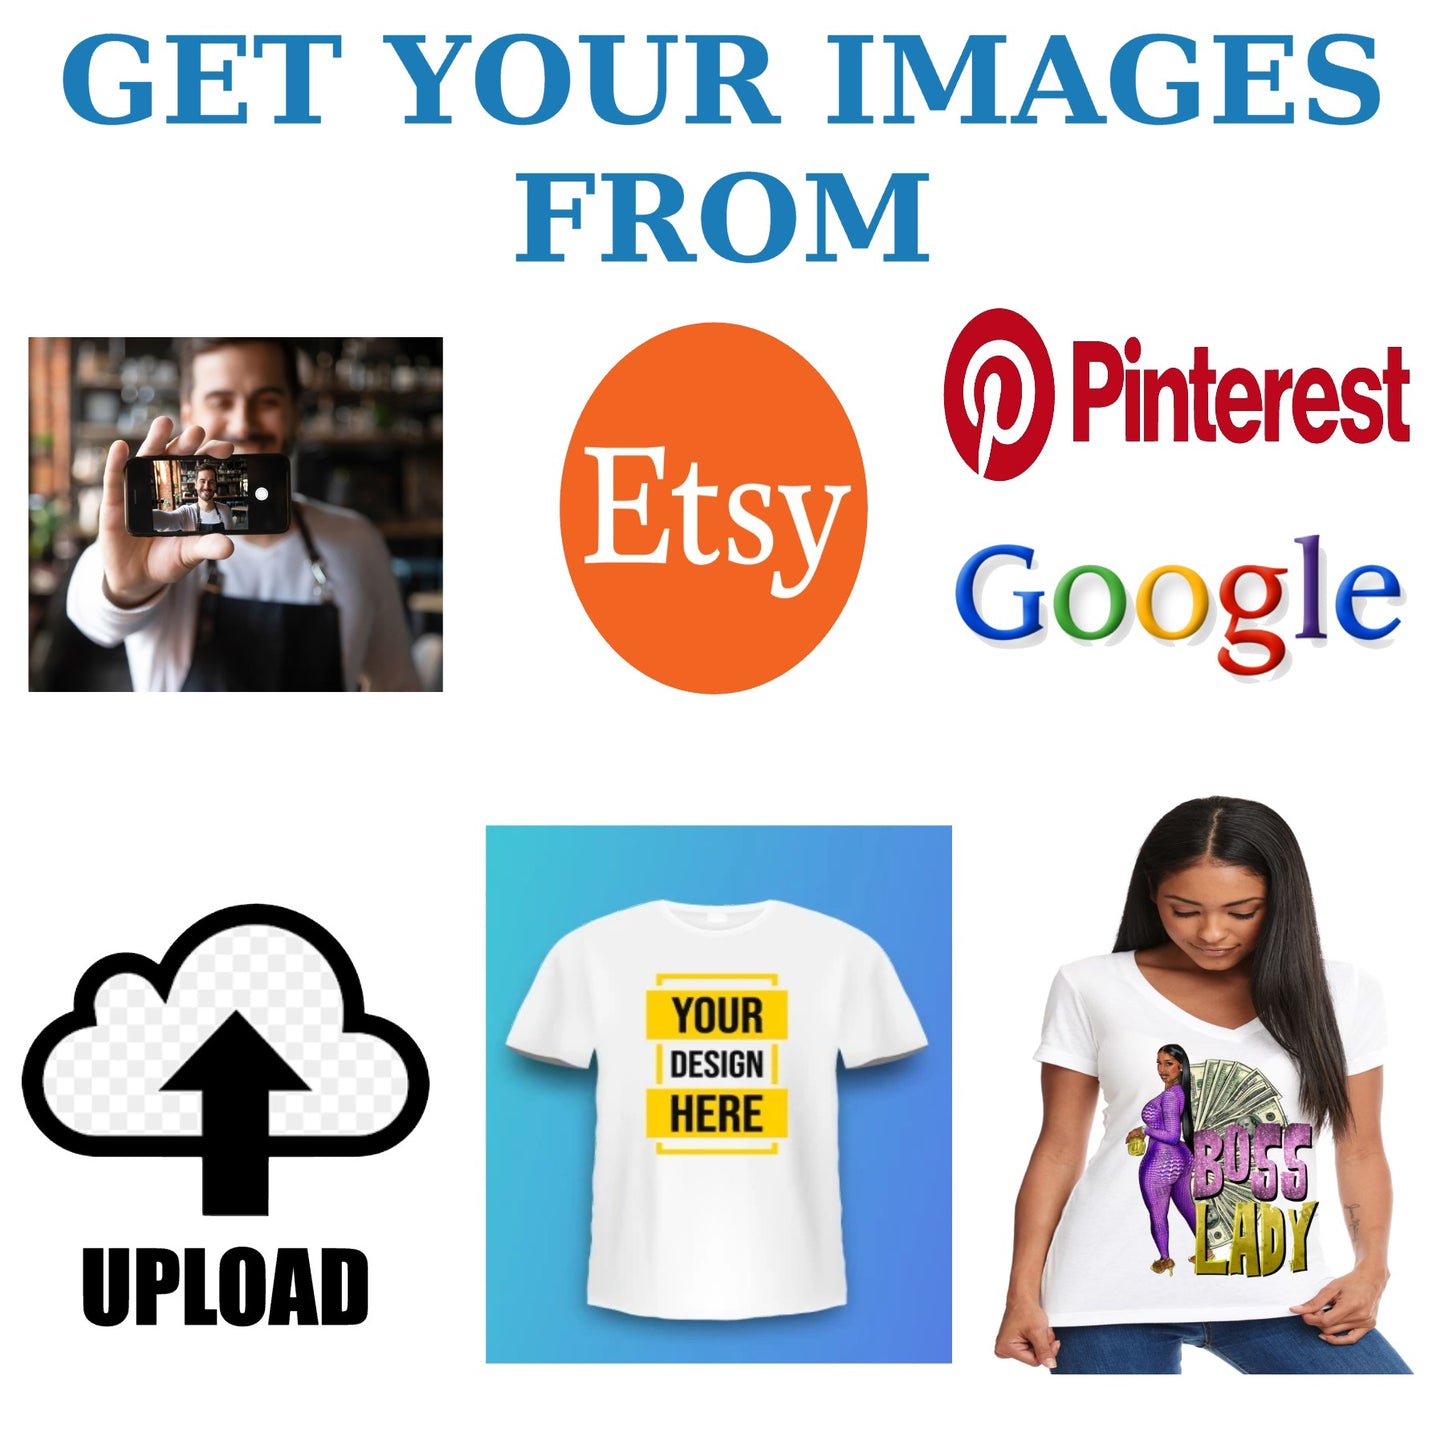 UPLOAD AN IMAGE FOR YOUR CUSTOM DESIGNED SUBLIMATED TSHIRT